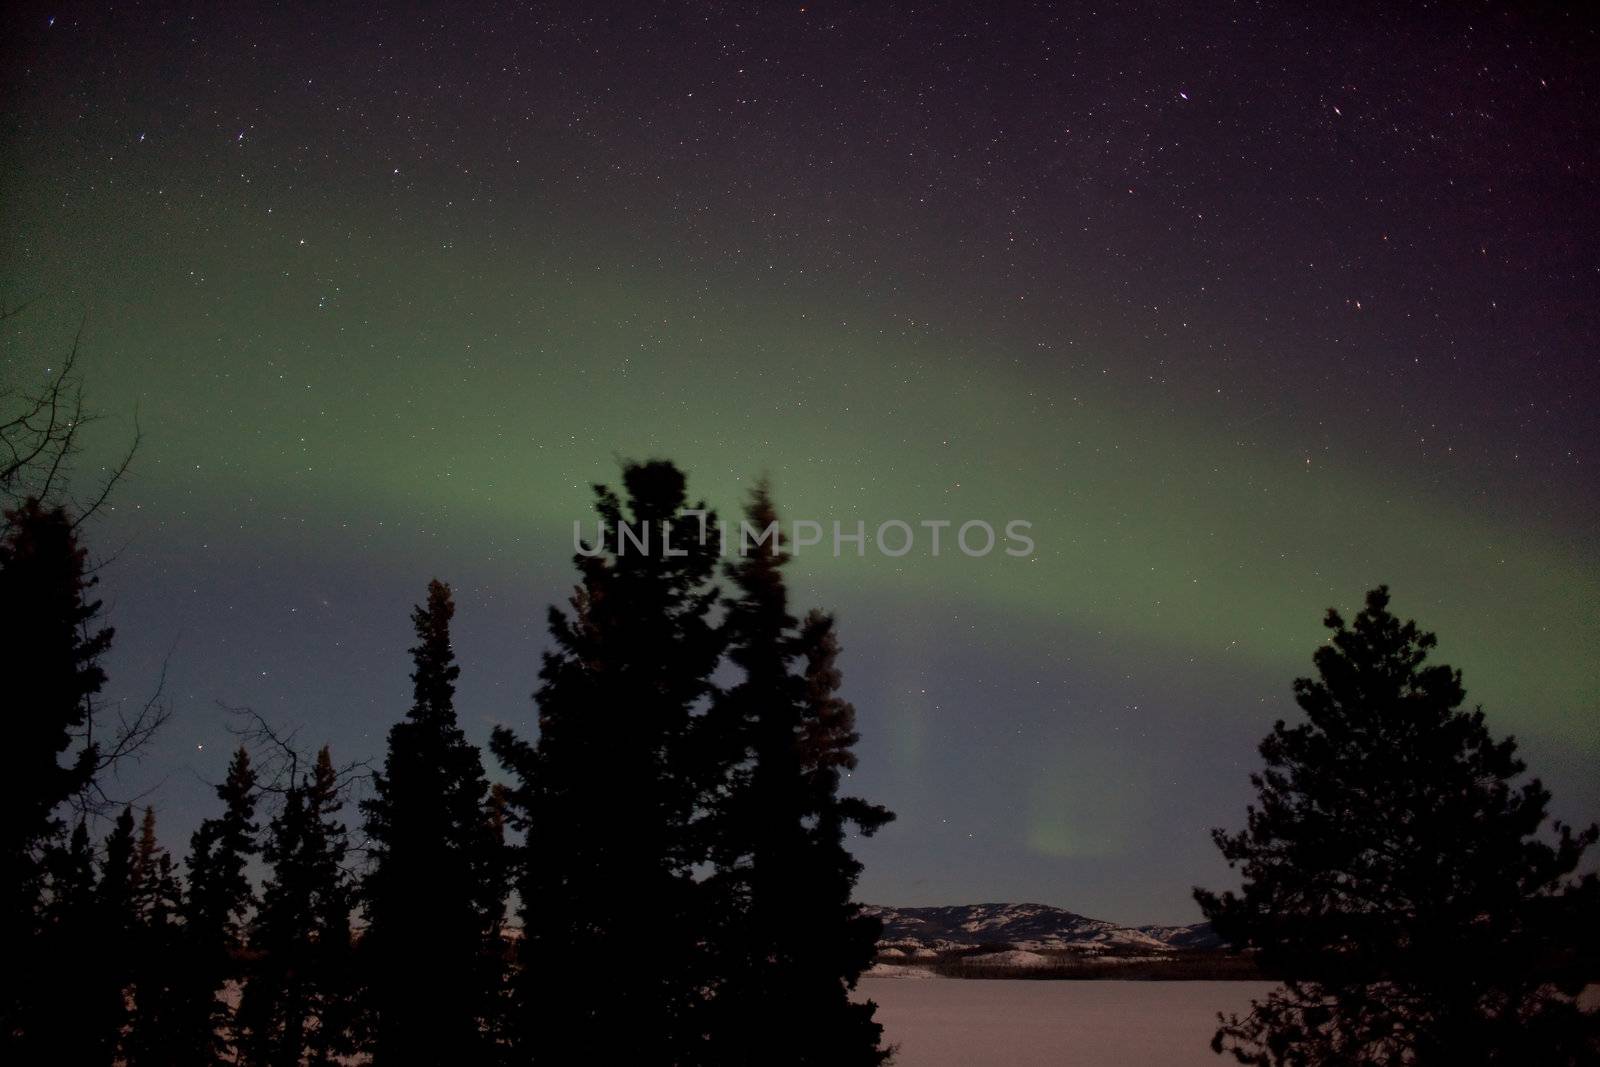 Aurora Borealis display and lots of stars in clear night sky, image taken at the shore of Lake Laberge, Yukon Territory, Canada